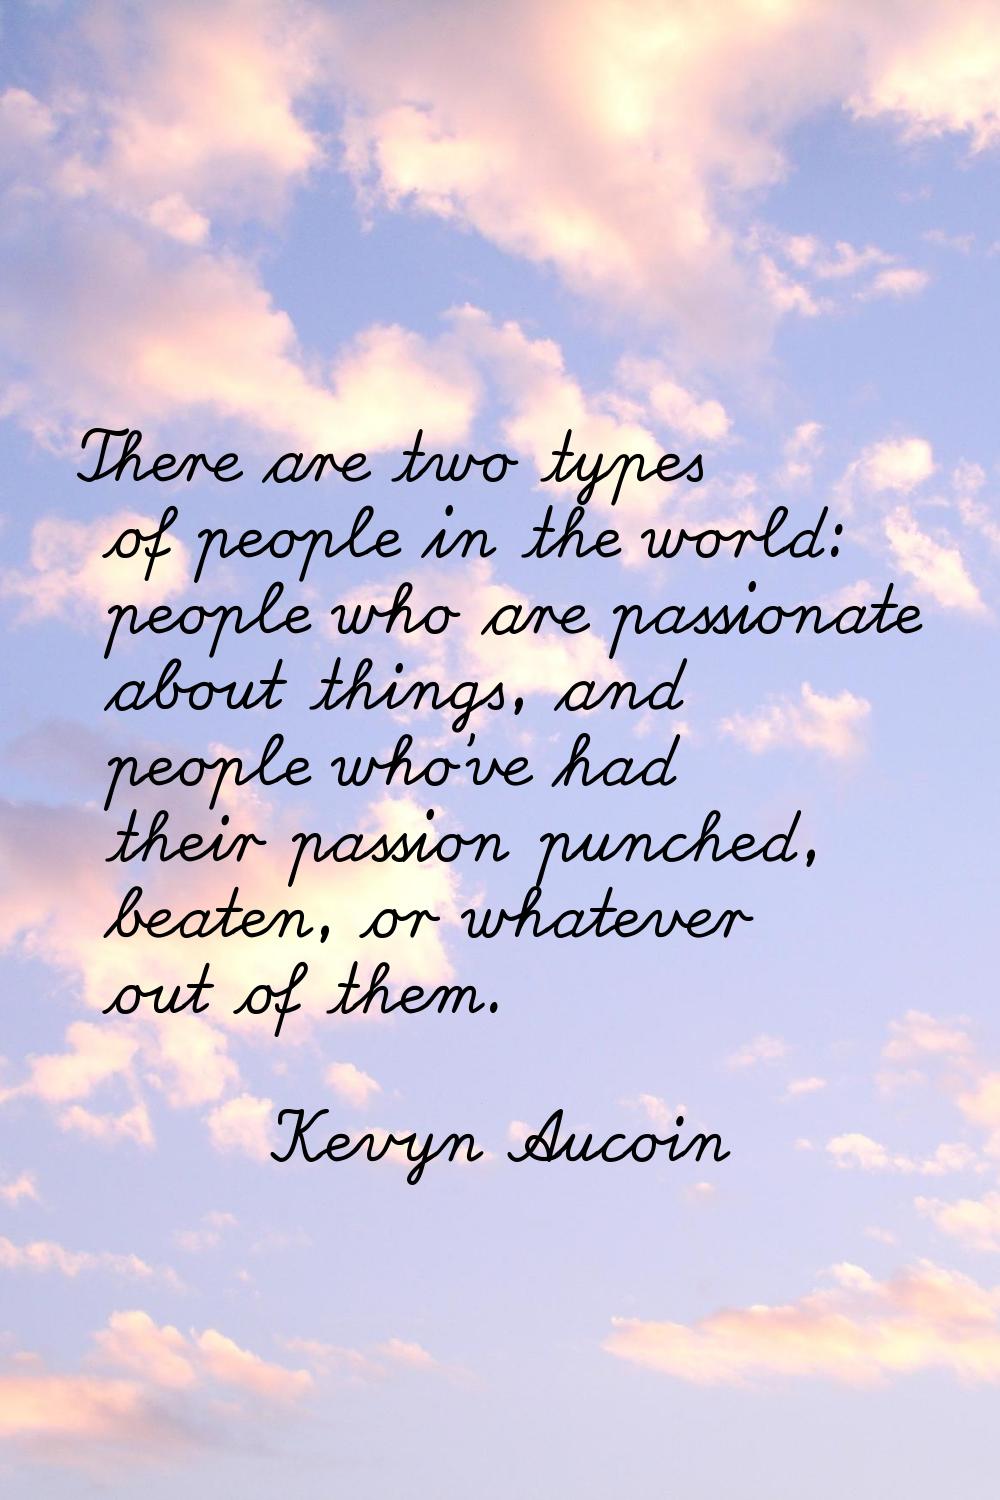 There are two types of people in the world: people who are passionate about things, and people who'